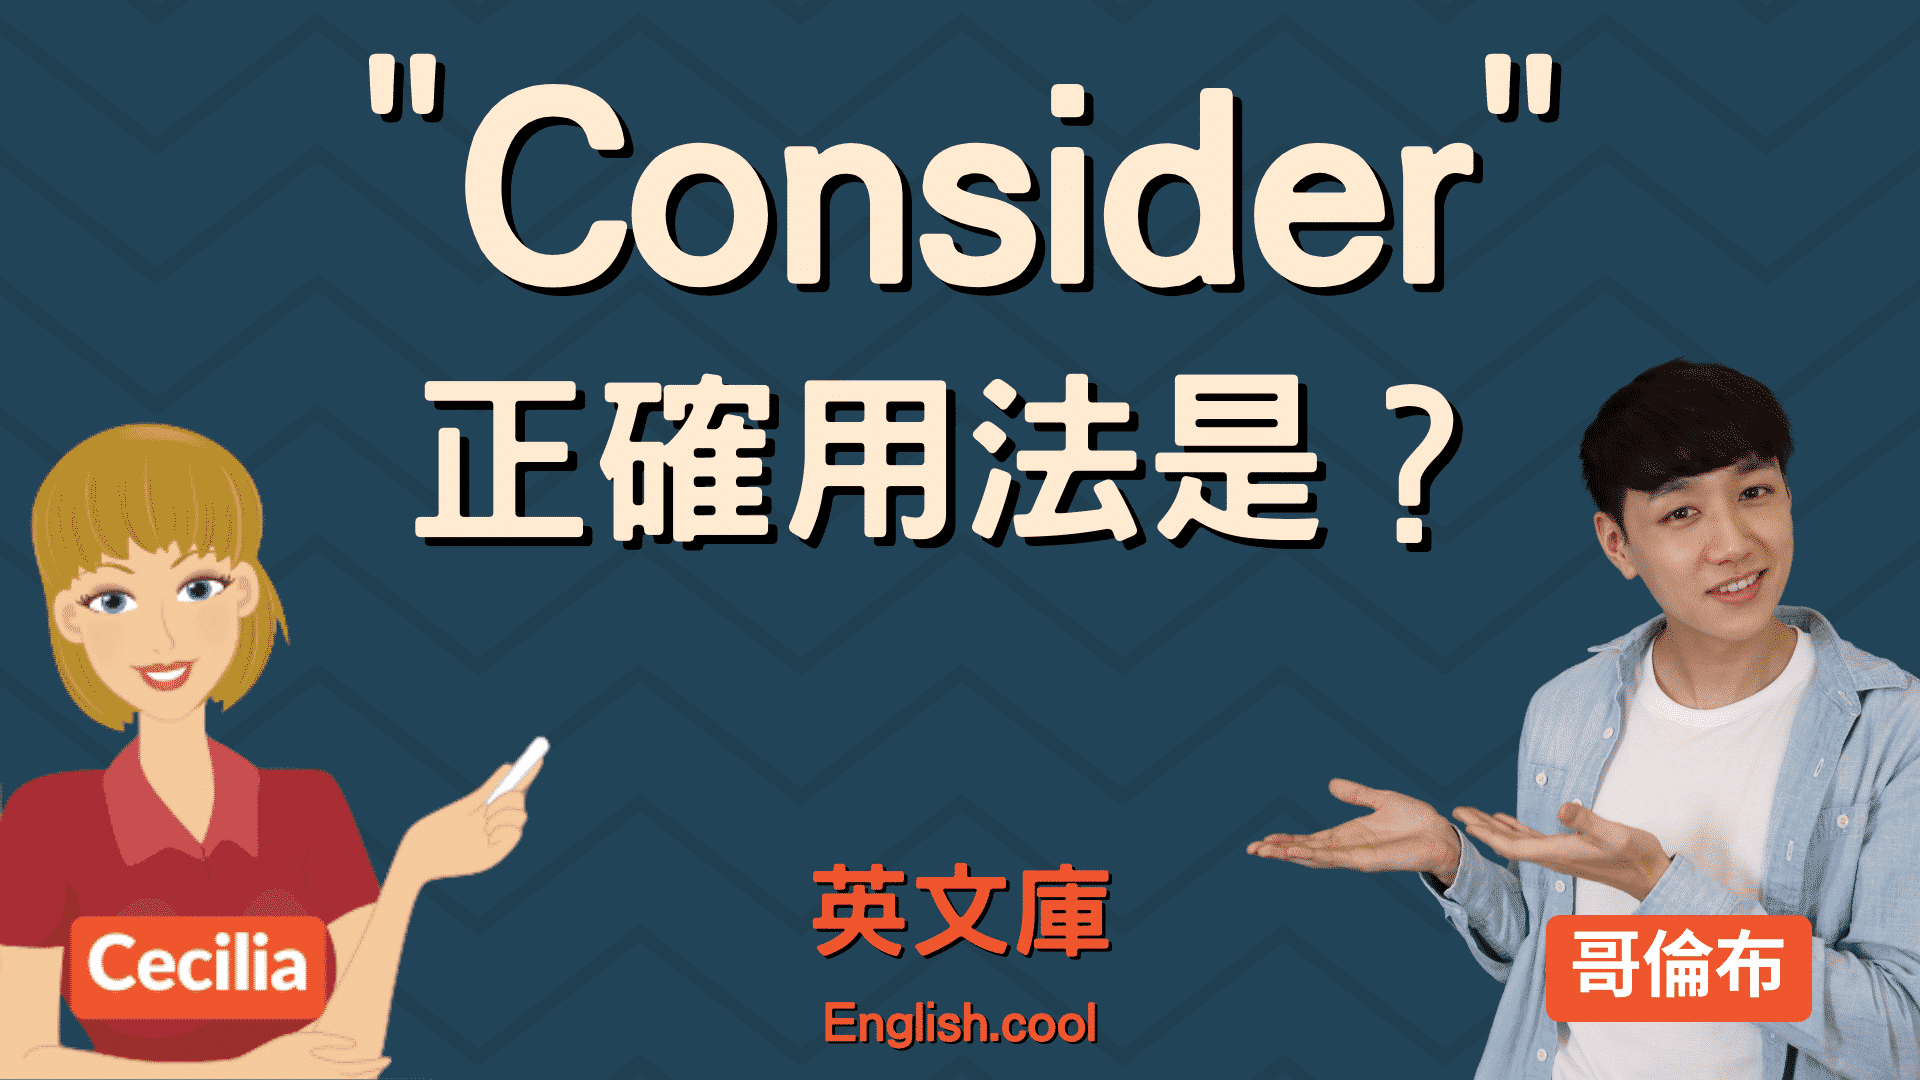 You are currently viewing 「consider」正確用法是？來看例句搞懂！